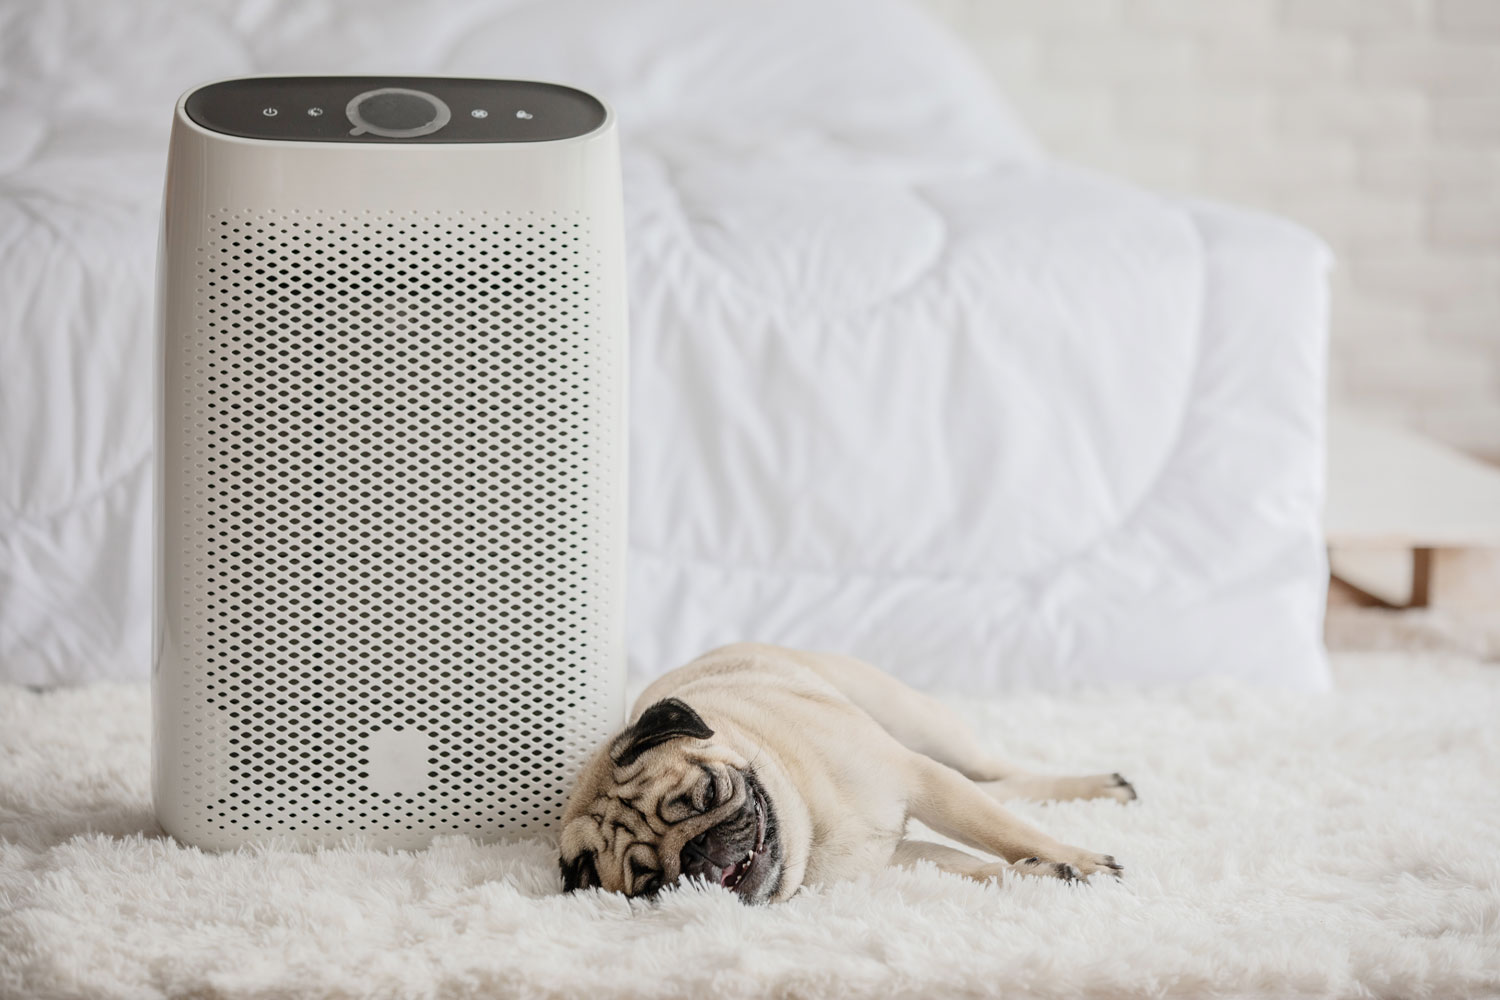 Dog Pug Breed and Air purifier in cozy white bed room for filter and cleaning removing dust